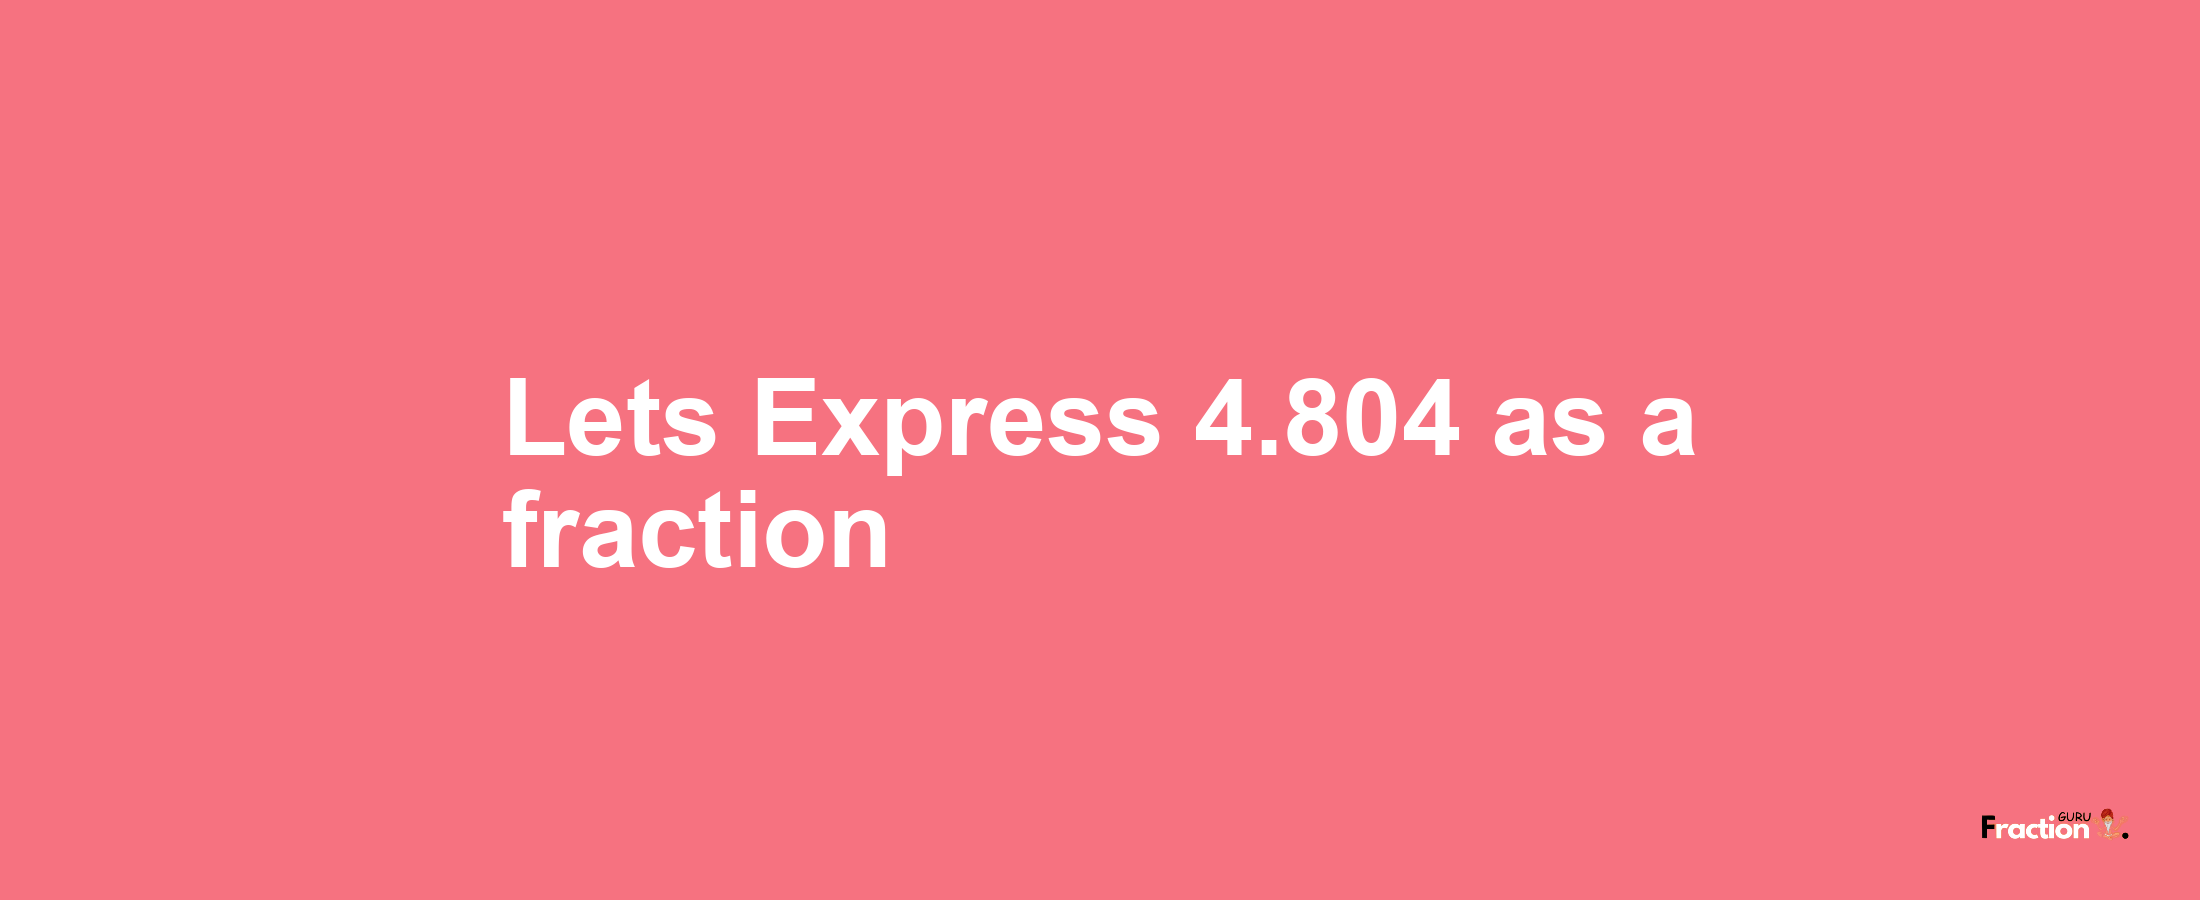 Lets Express 4.804 as afraction